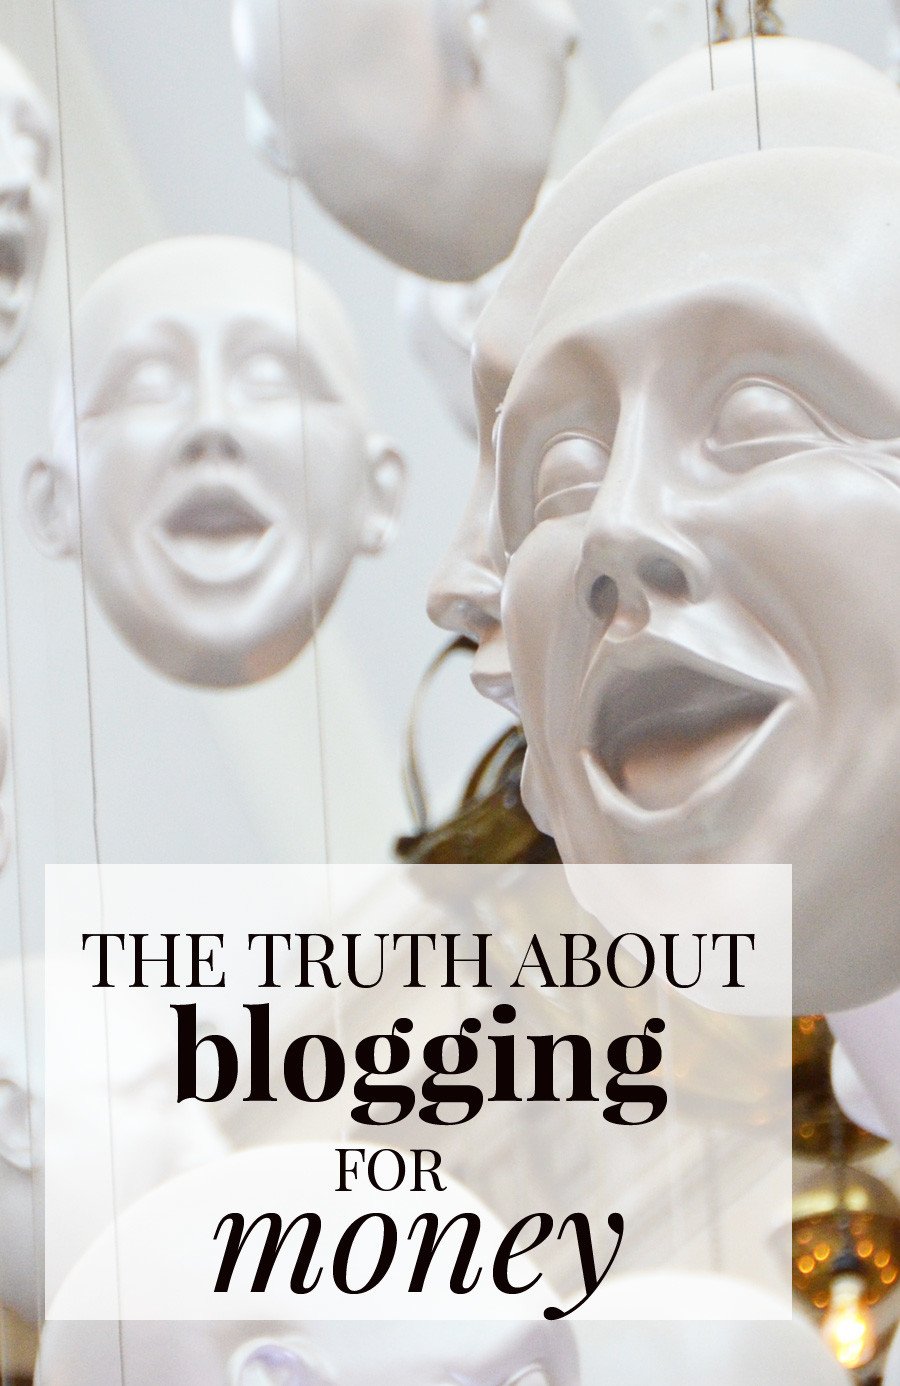 the truth about blogging for money, and how blogging has changed over the years